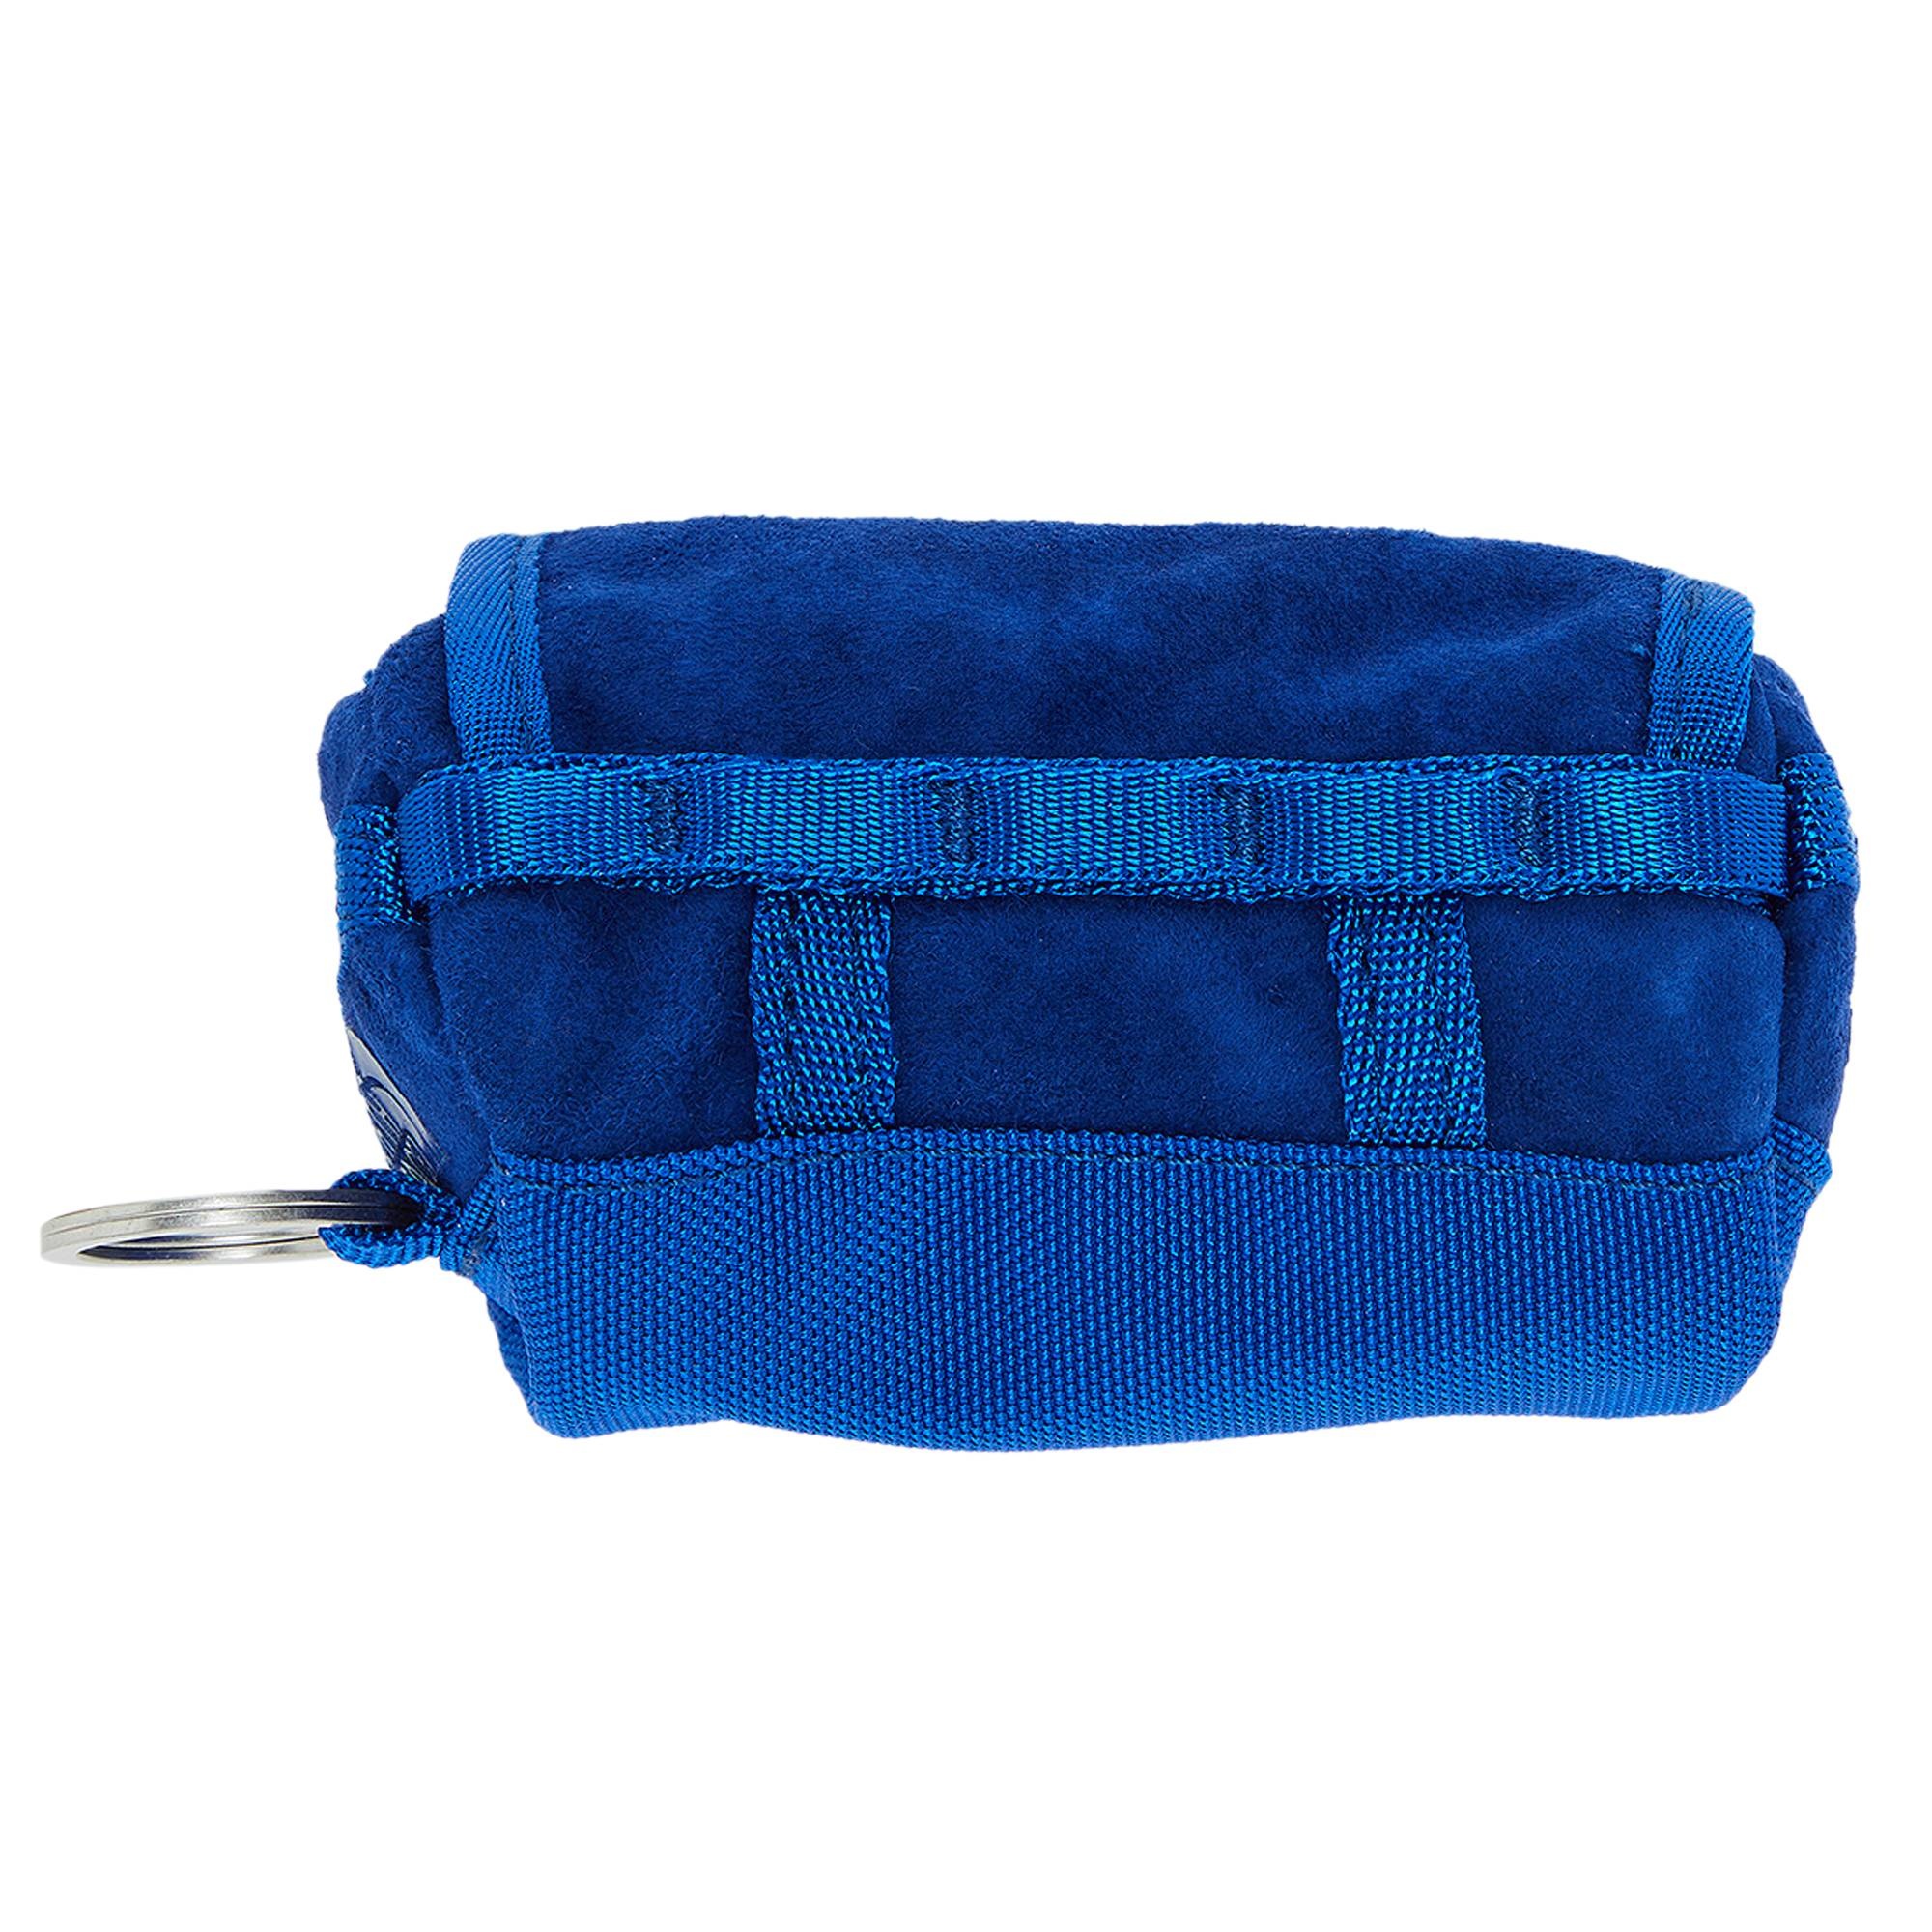 Supreme x The North Face Suede Base Camp Duffle Keychain 'Blue' - 2